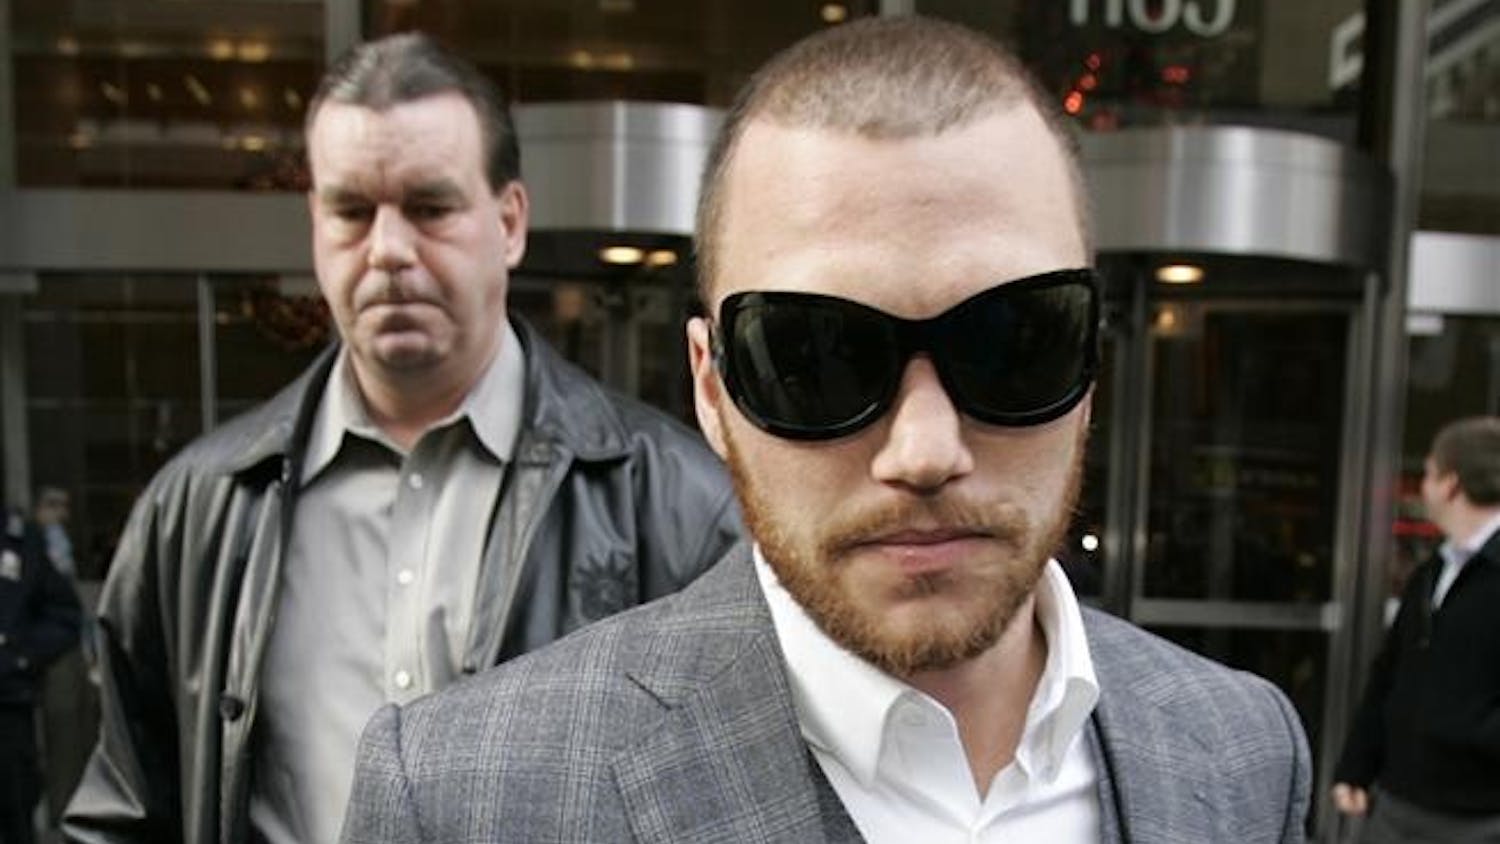 Dallas Stars forward Sean Avery leaves a meeting with NHL commissioner Gary Bettman on Dec. 4 in New York. The NHL suspended Avery indefinitely on Dec. 2 for making a crude reference to former girlfriends while talking with reporters.